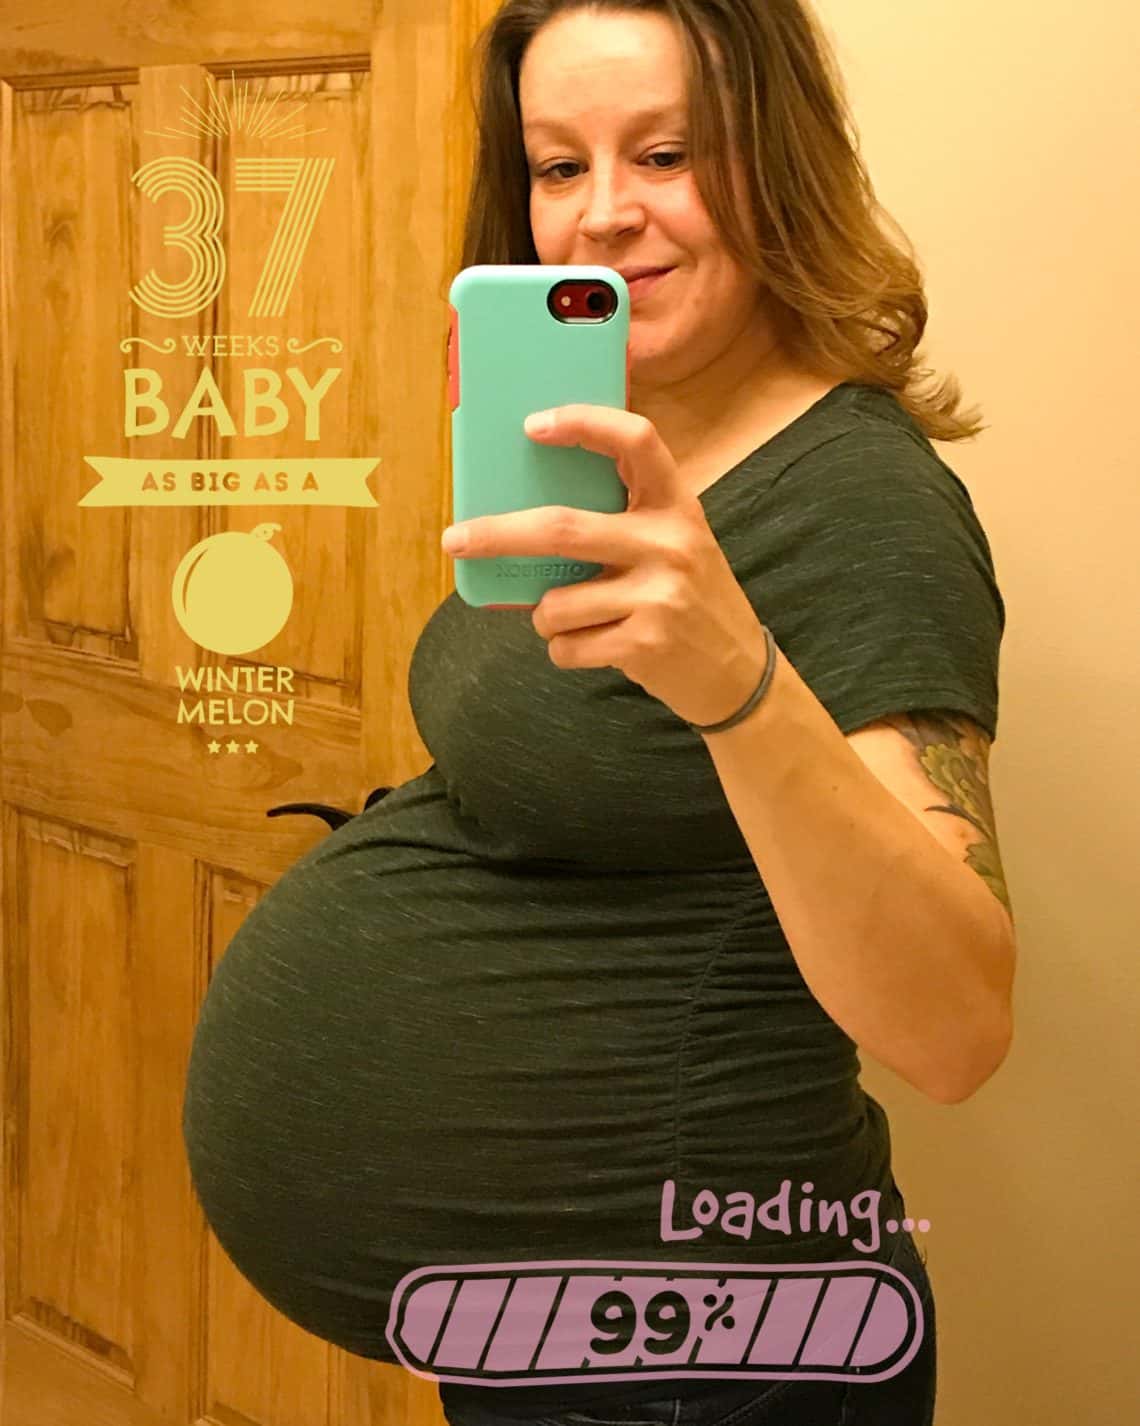 37 Weeks Pregnant with Twins: Tips, Advice & How to Prep - Twiniversity